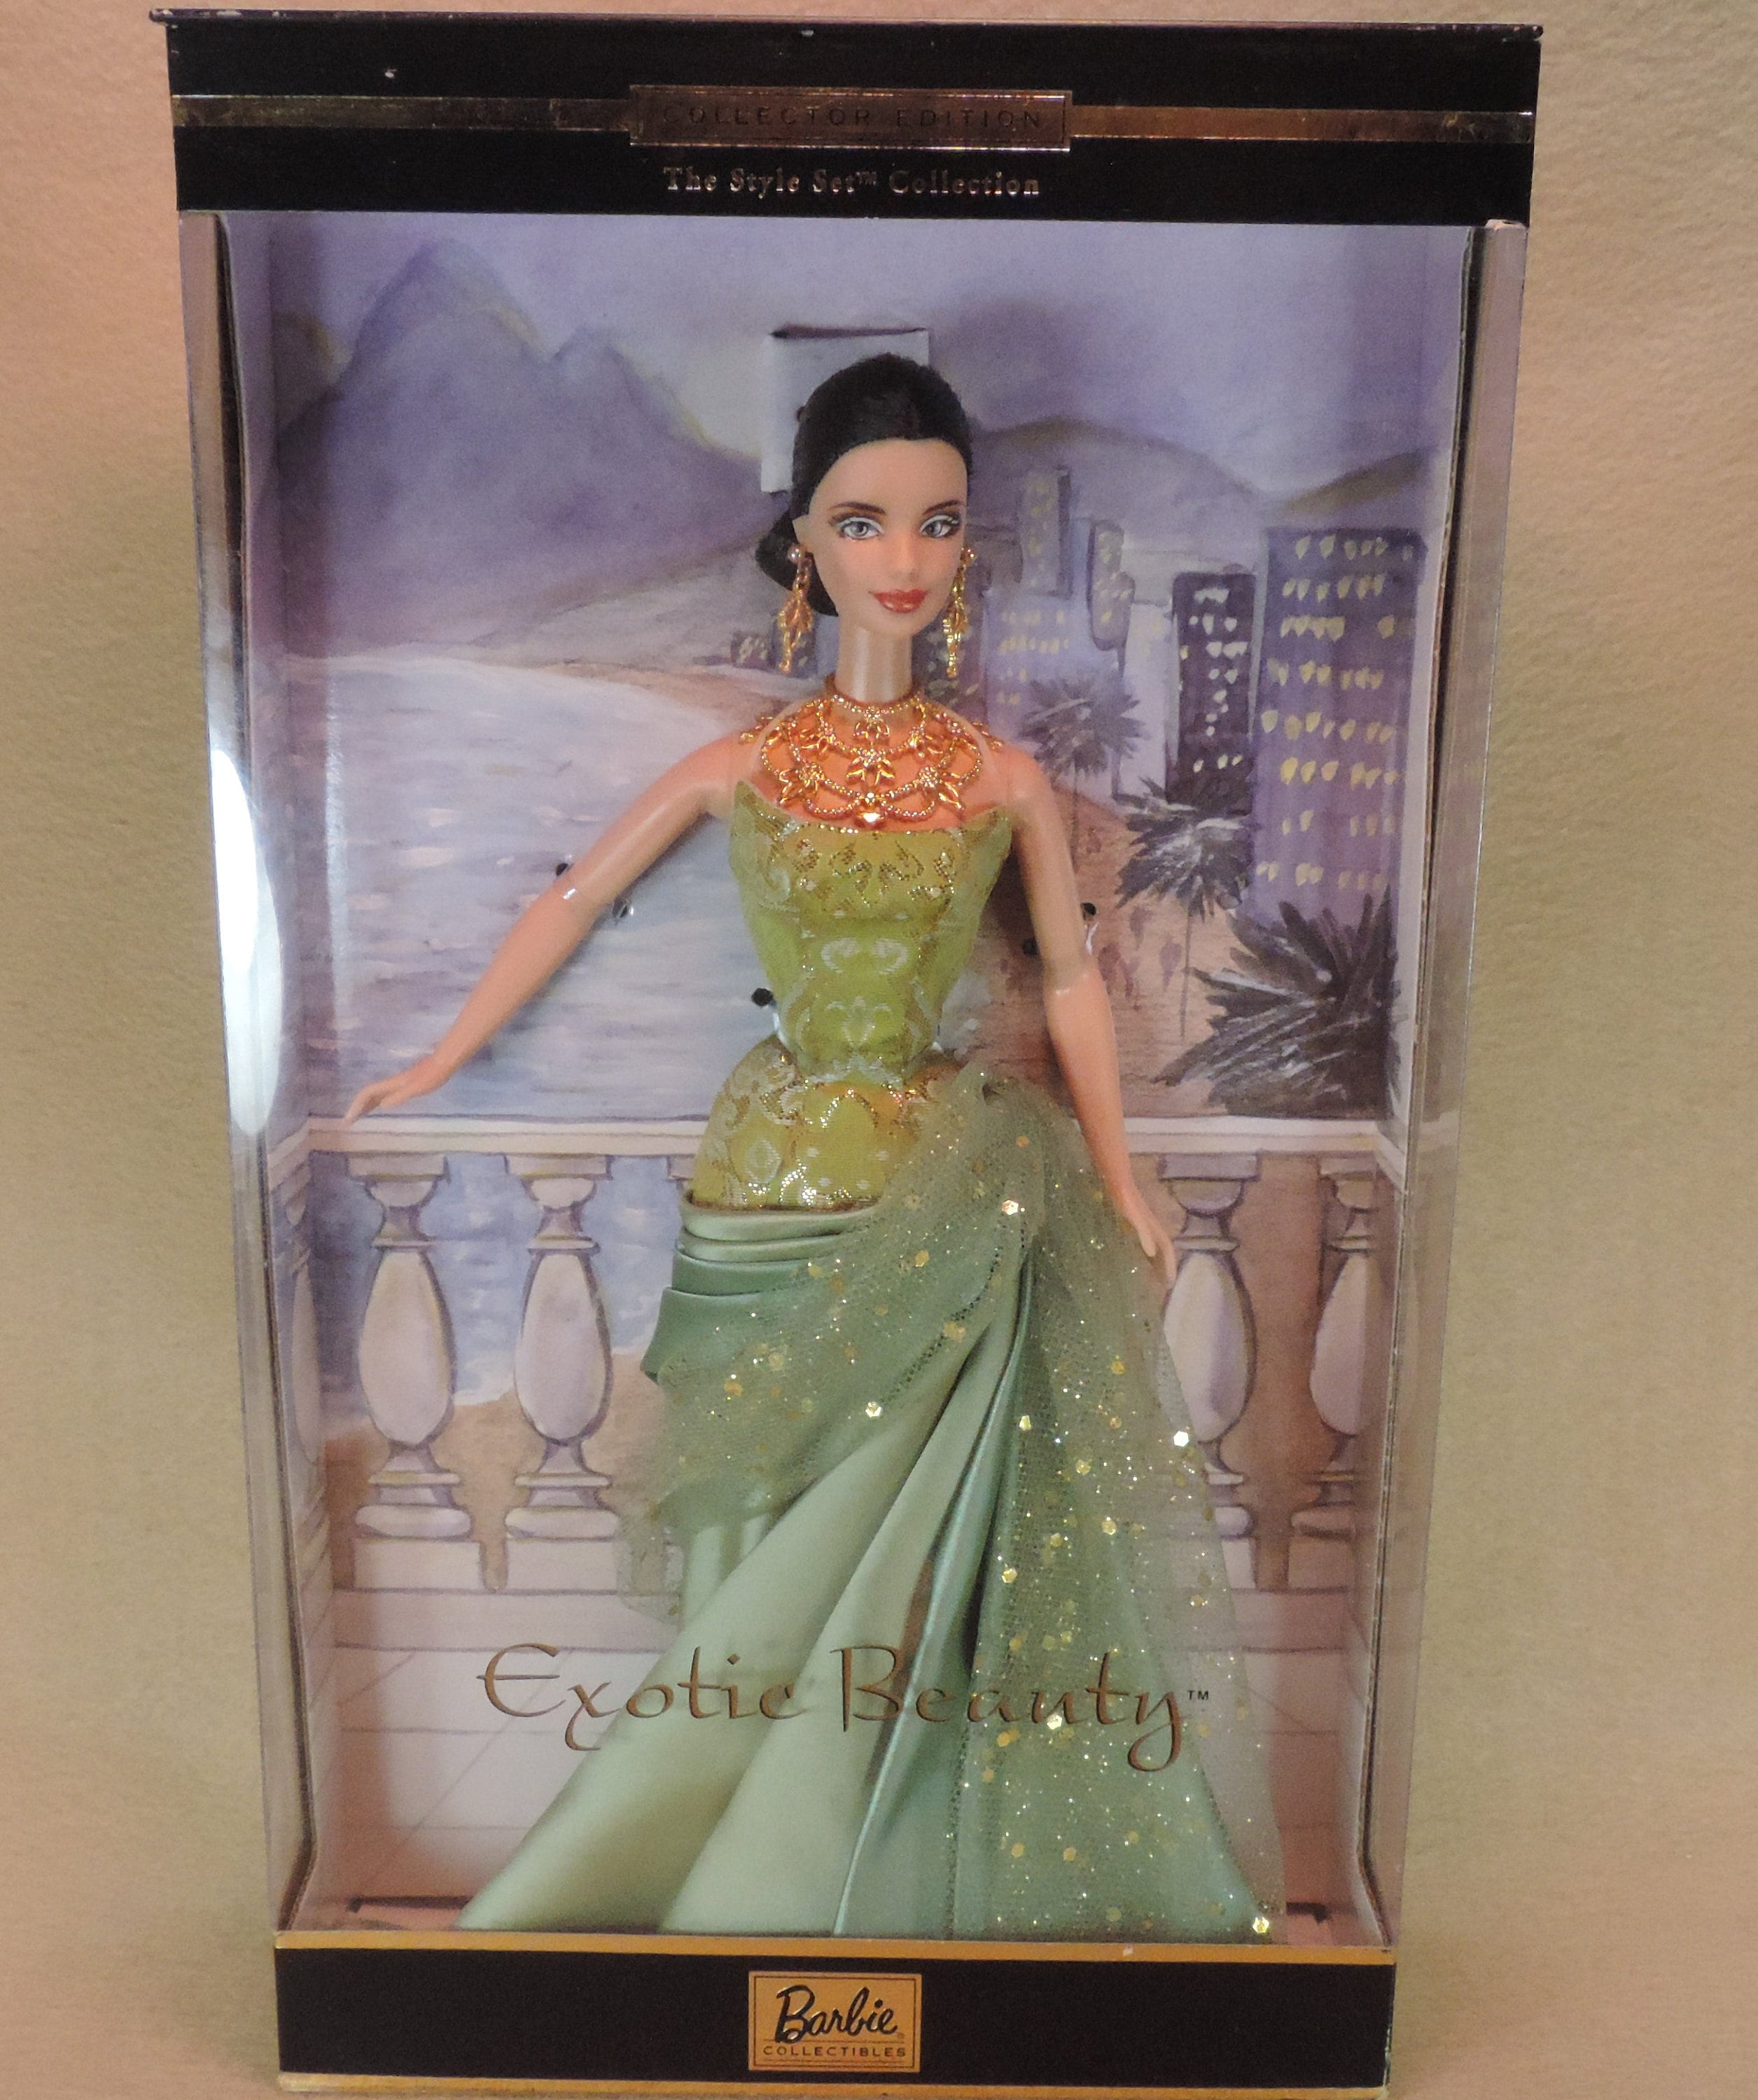 Rare Exotic Beauty Barbie NEW in Box 2002 FREE SHIPPING - Etsy